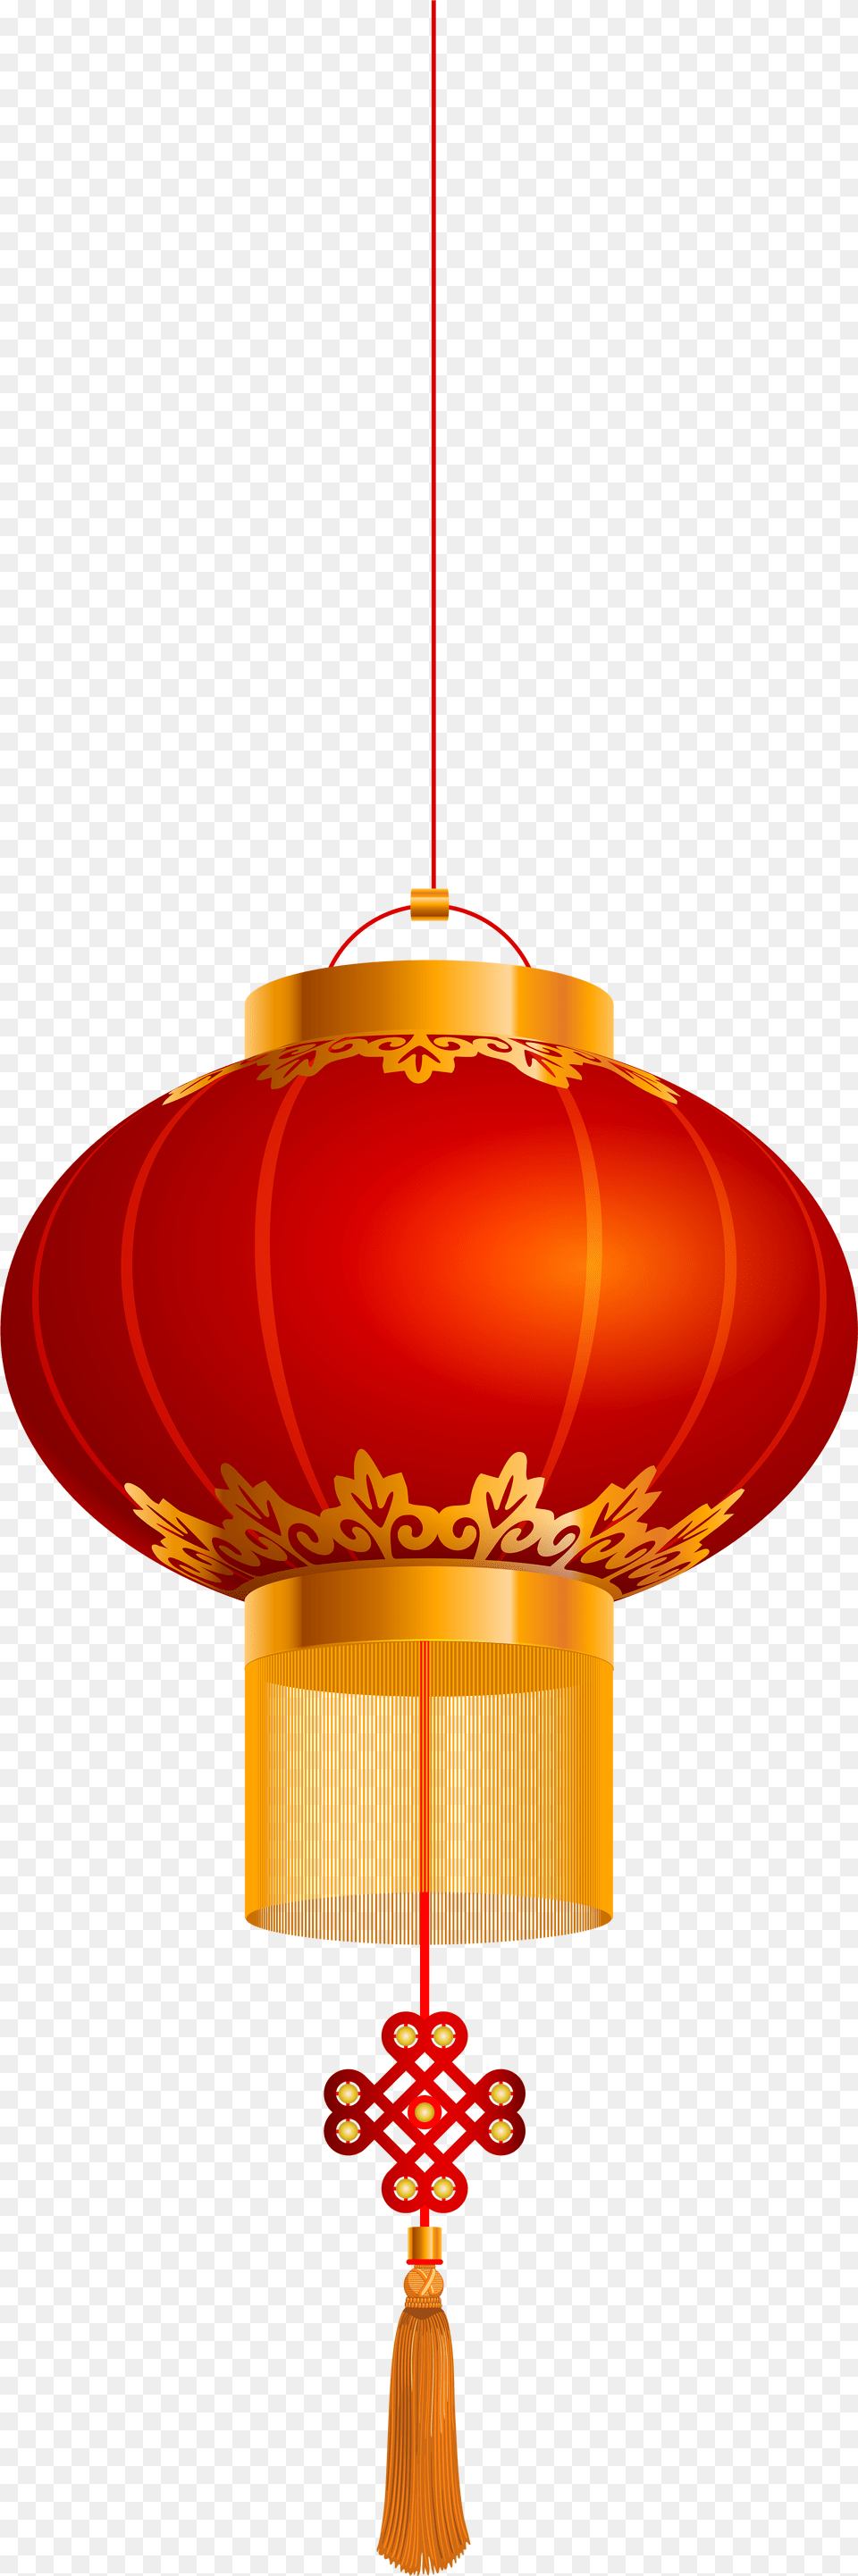 Lamp Clipart Chinese Chinese Lantern Clipart Lampshade Free Transparent Png